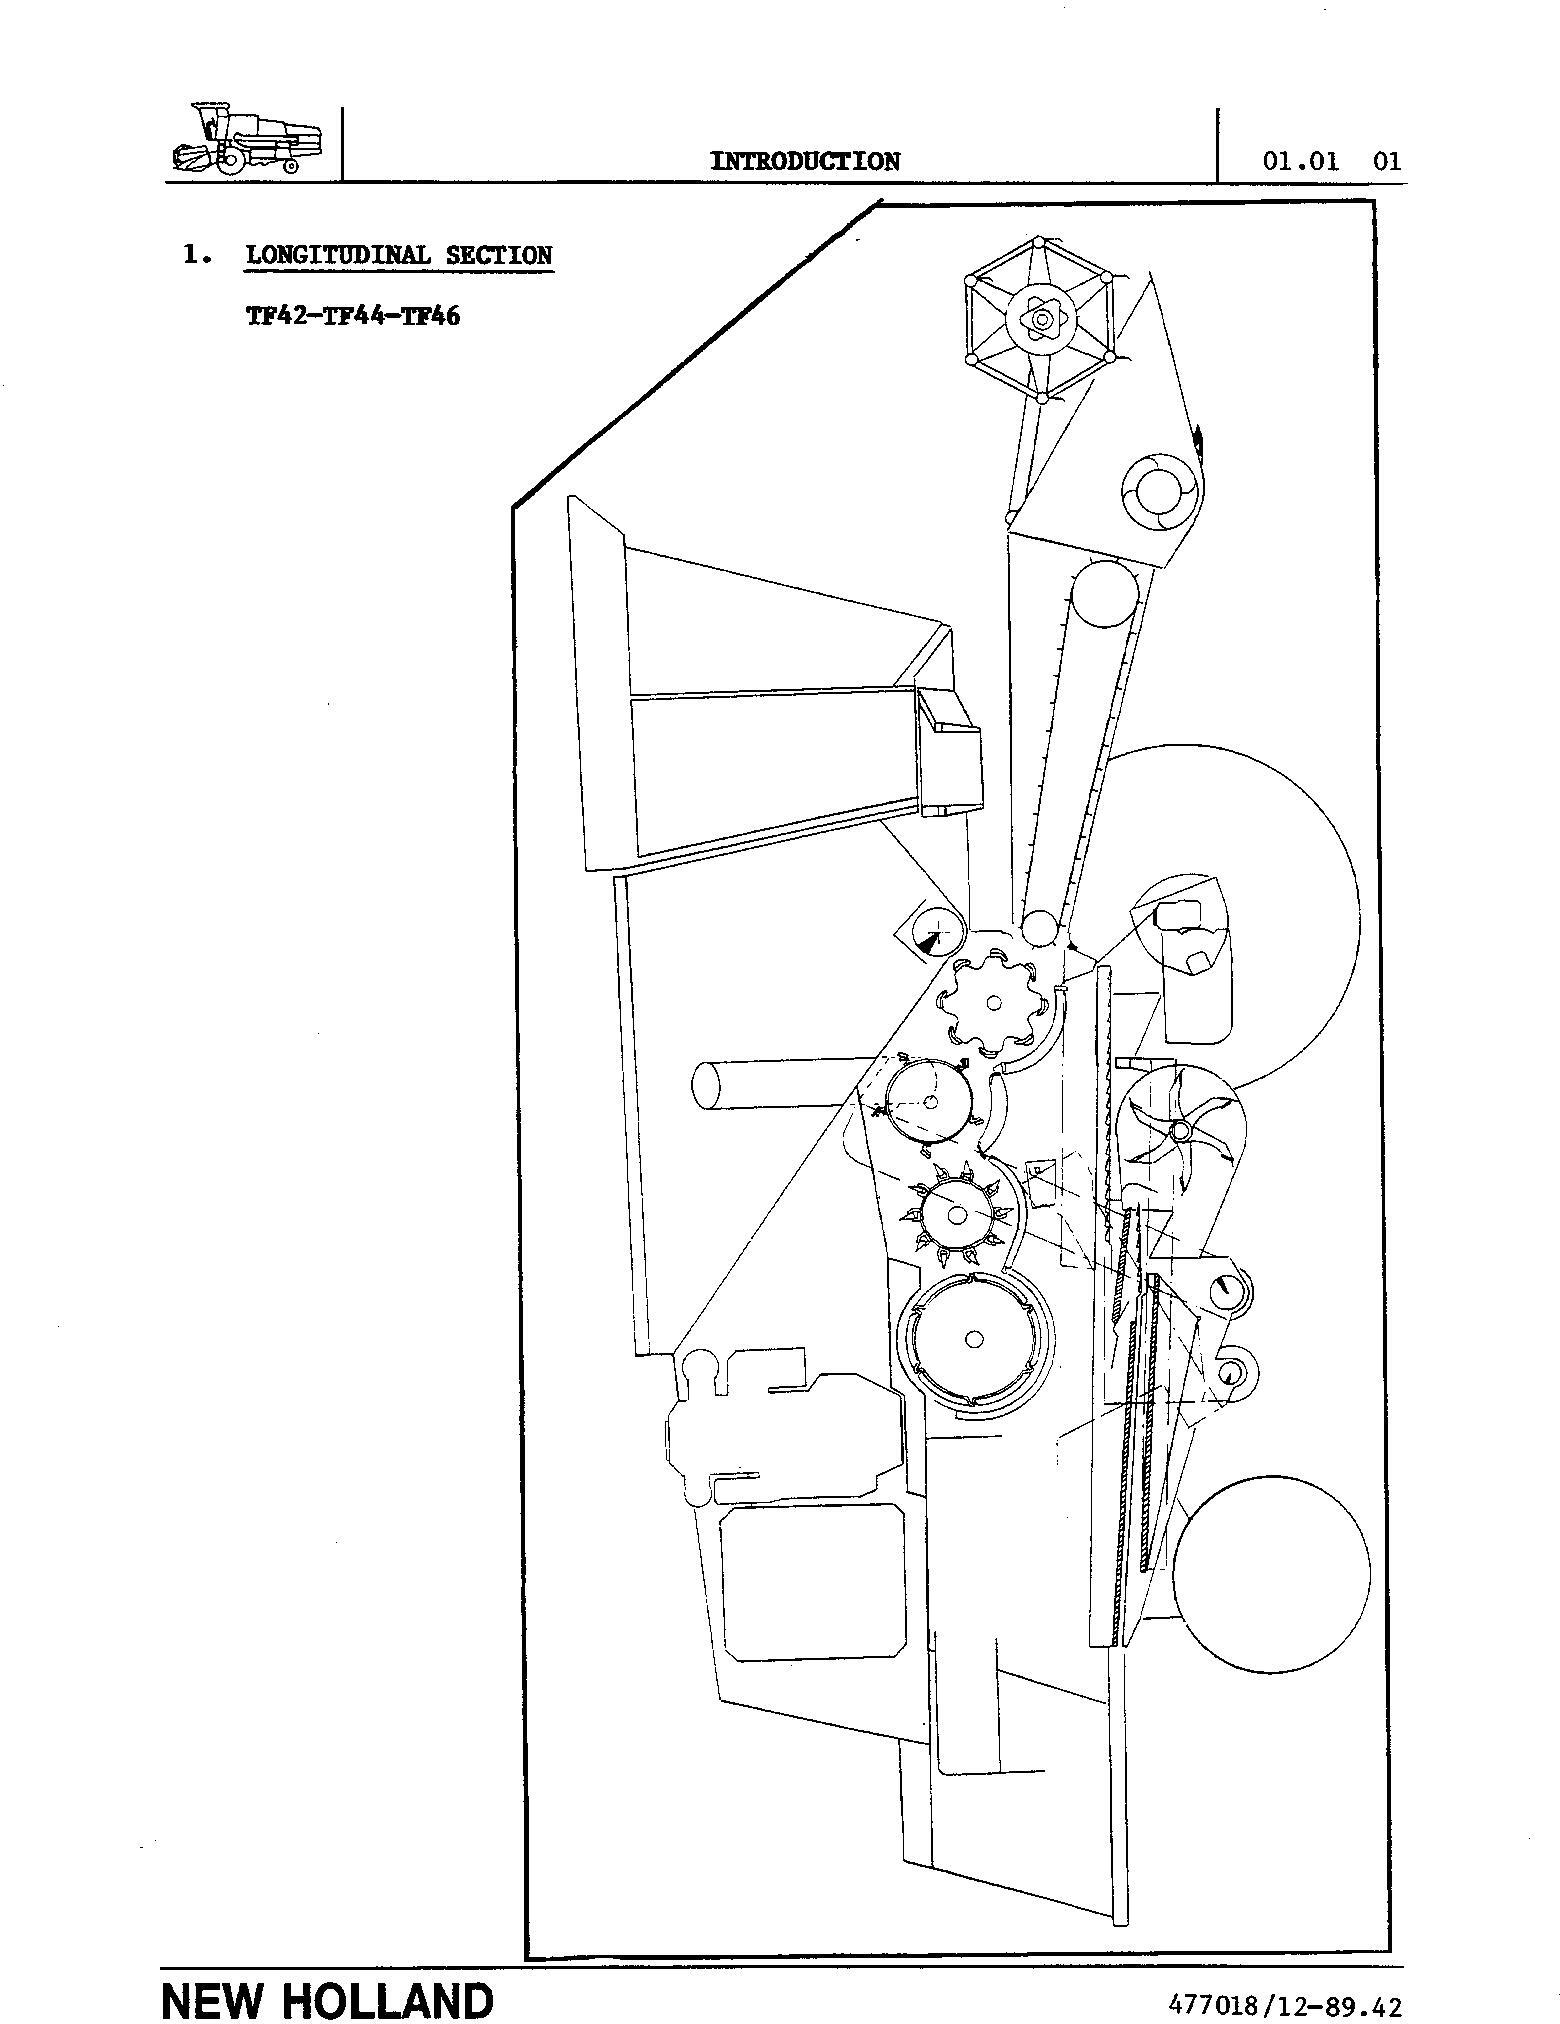 New Holland TX36, TX66, TX68 Combines (for TX66&TX68 Mechanical Info only) Service Manual - 2